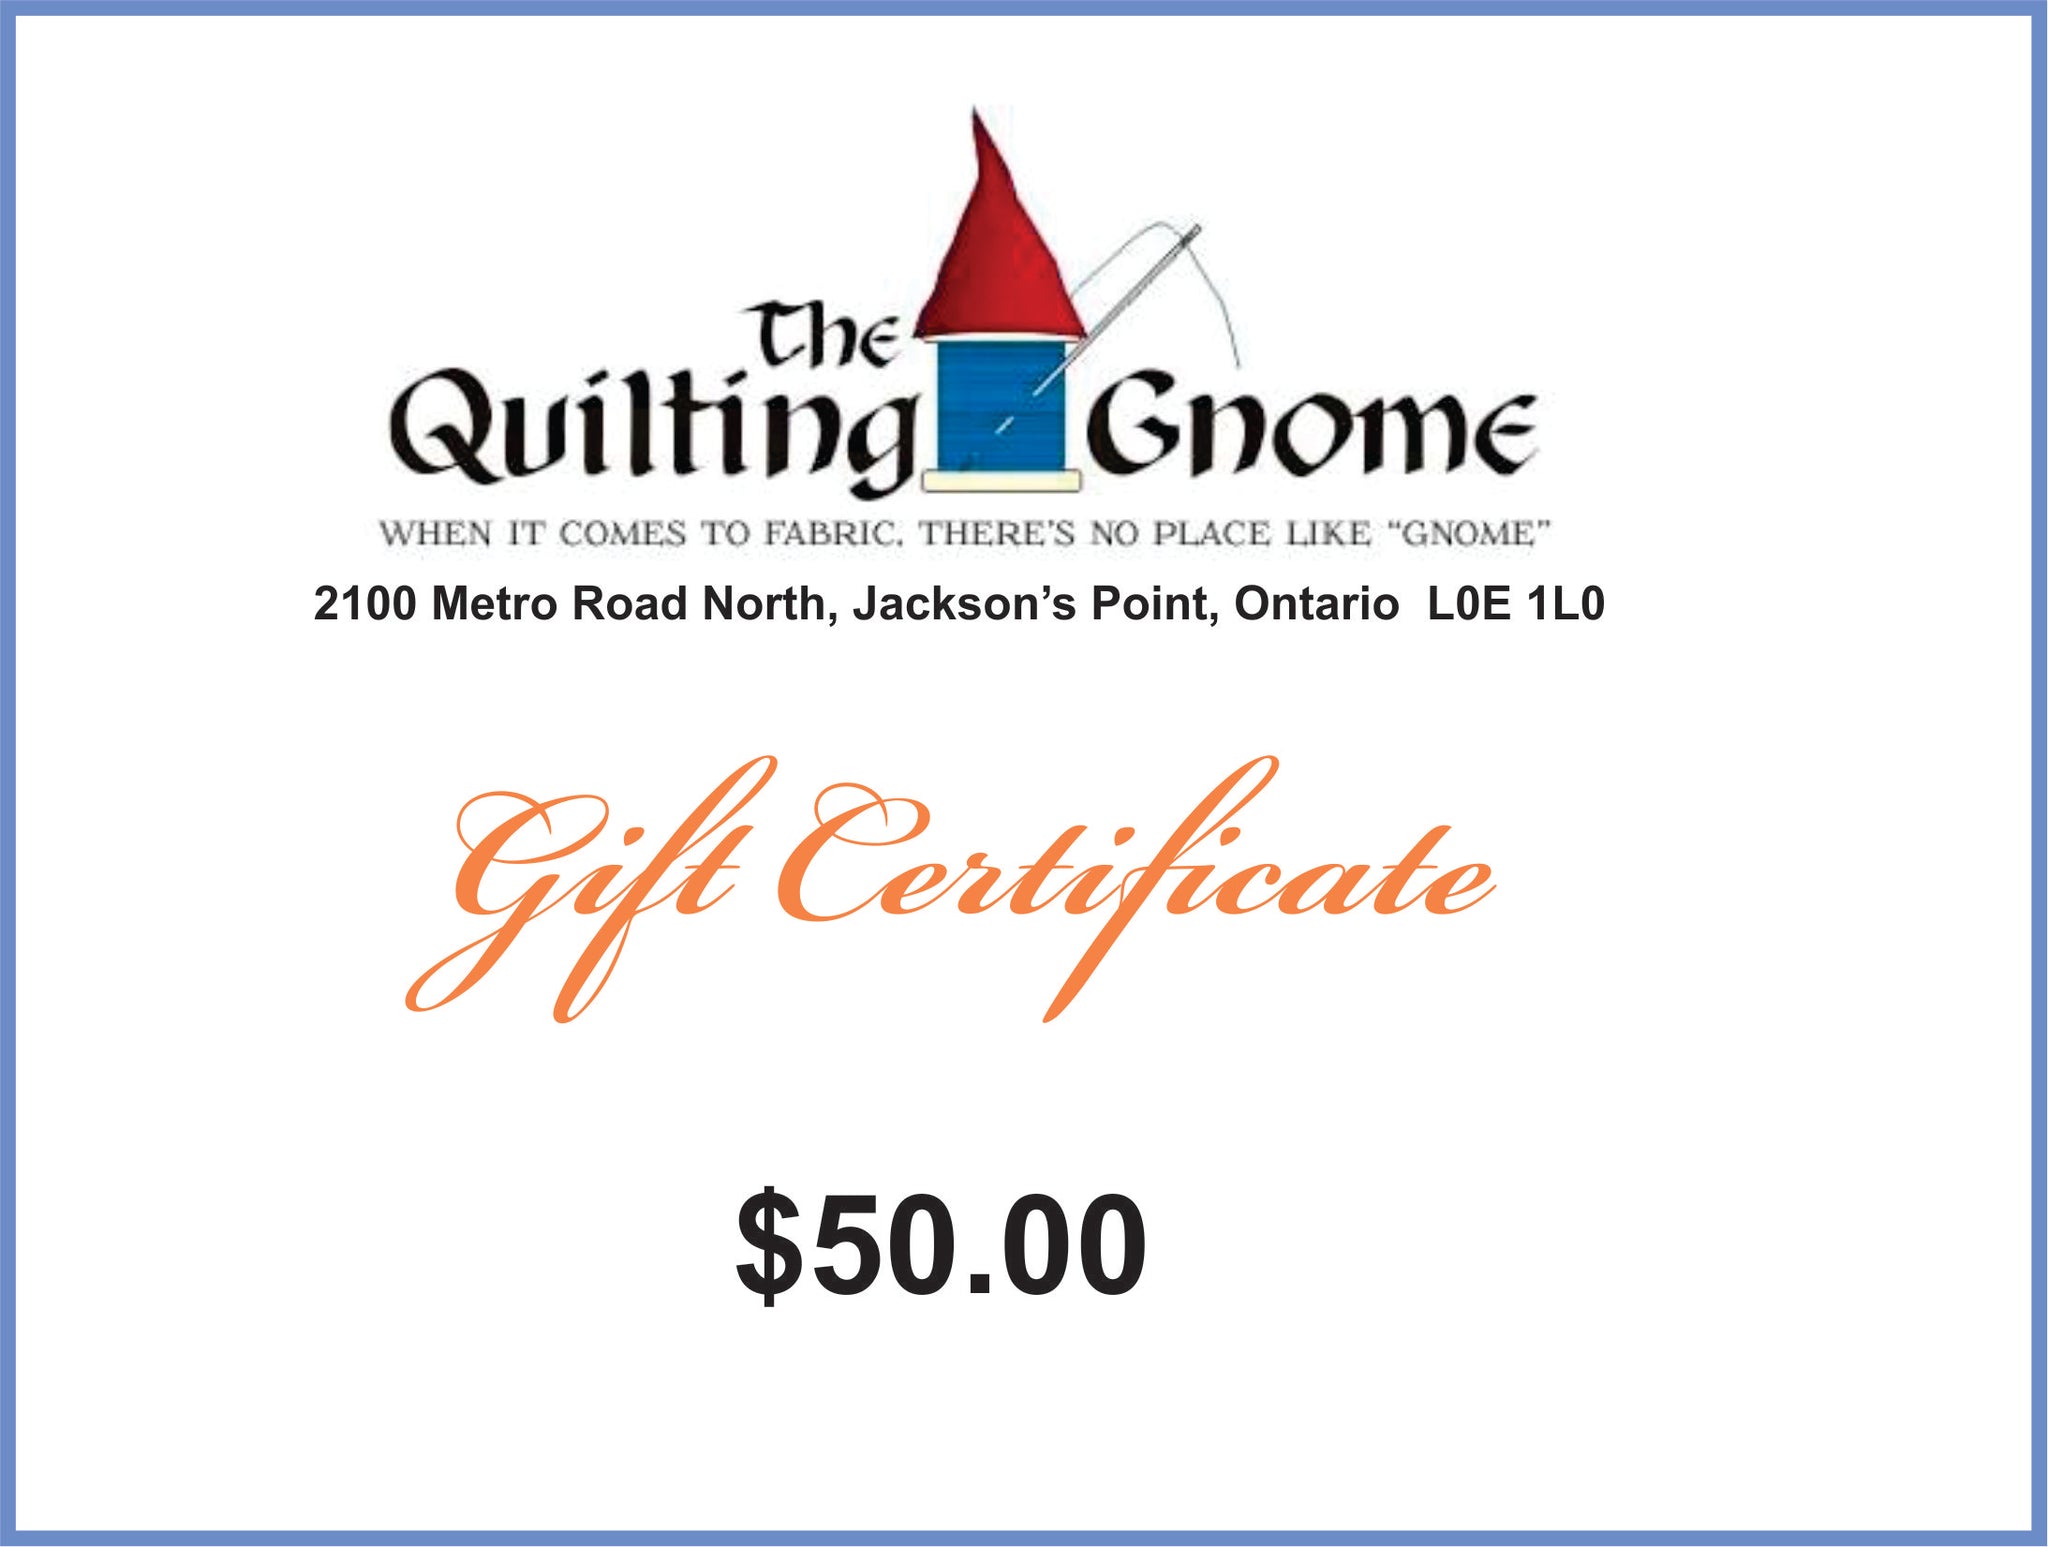 Gift Certificate $50.00 - The Quilting Gnome